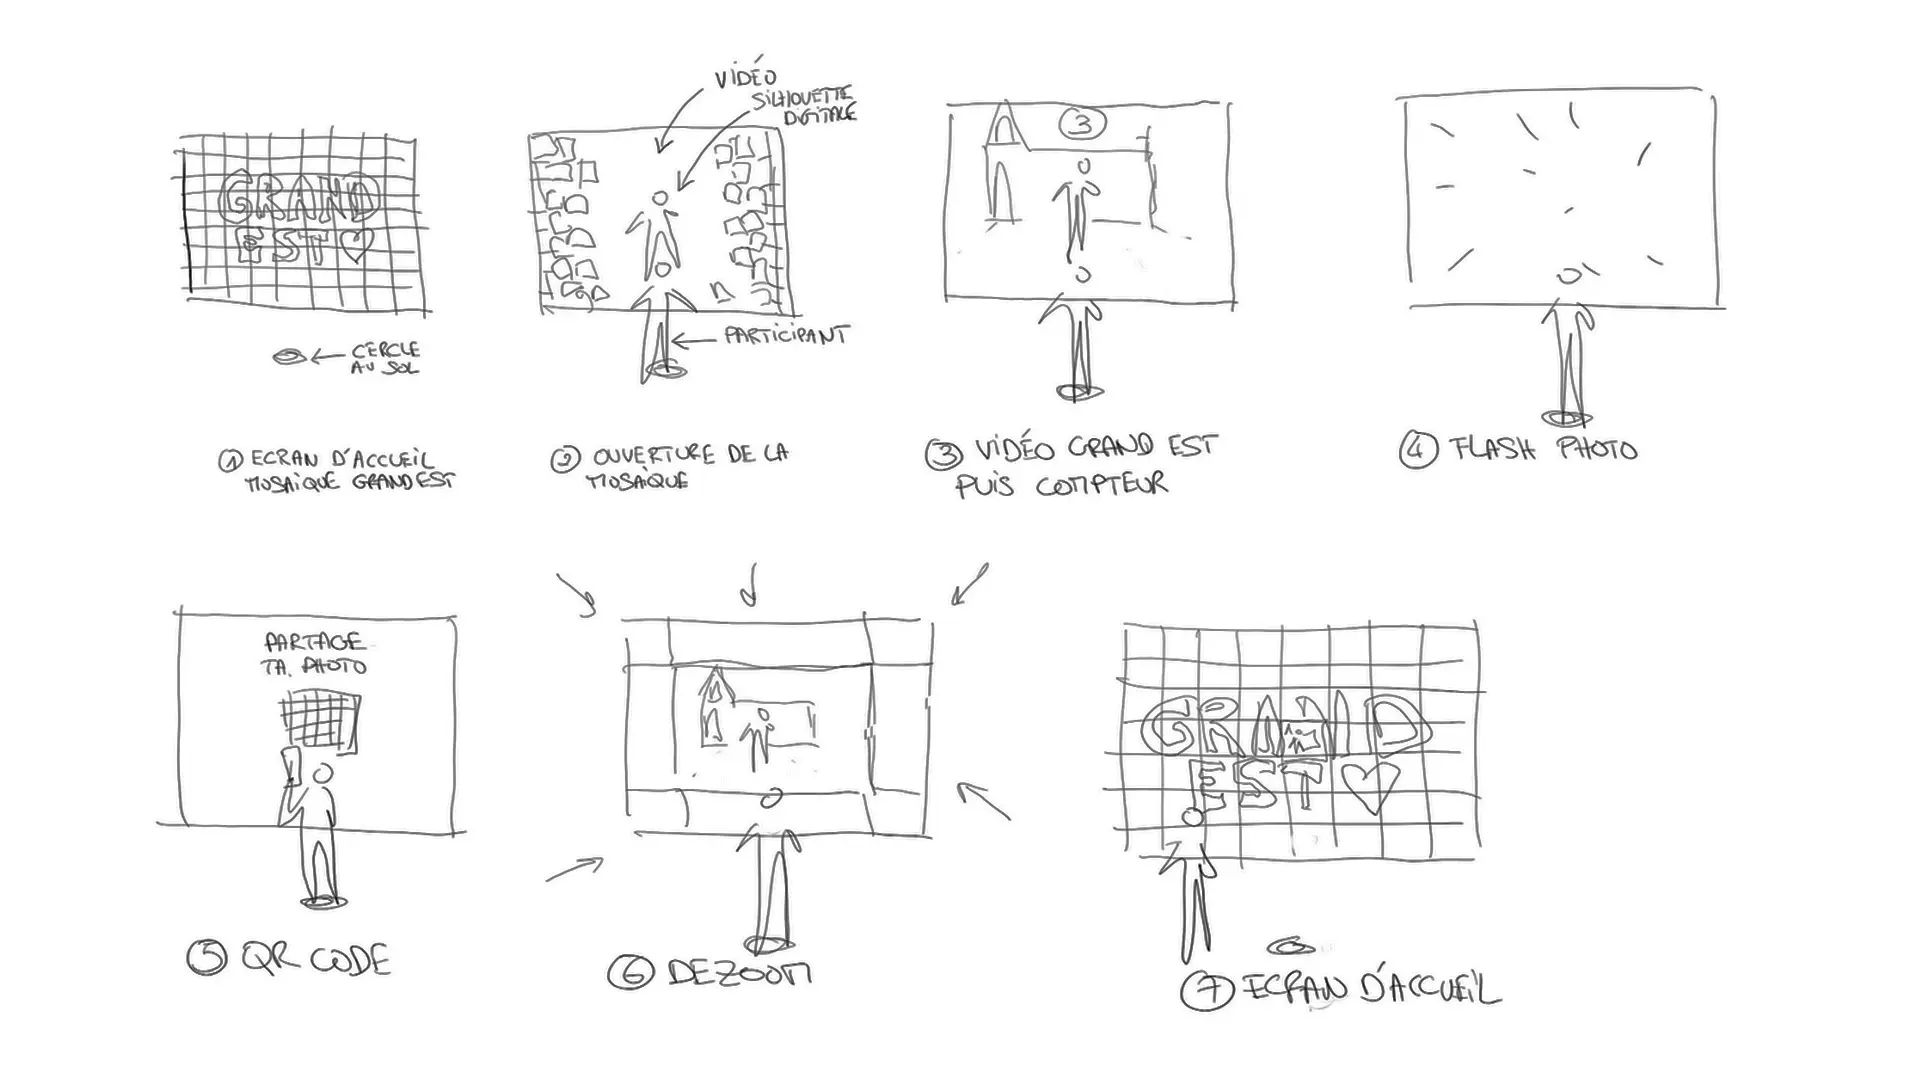 Storyboard of the immersive augmented reality installation for the Région Grand Est